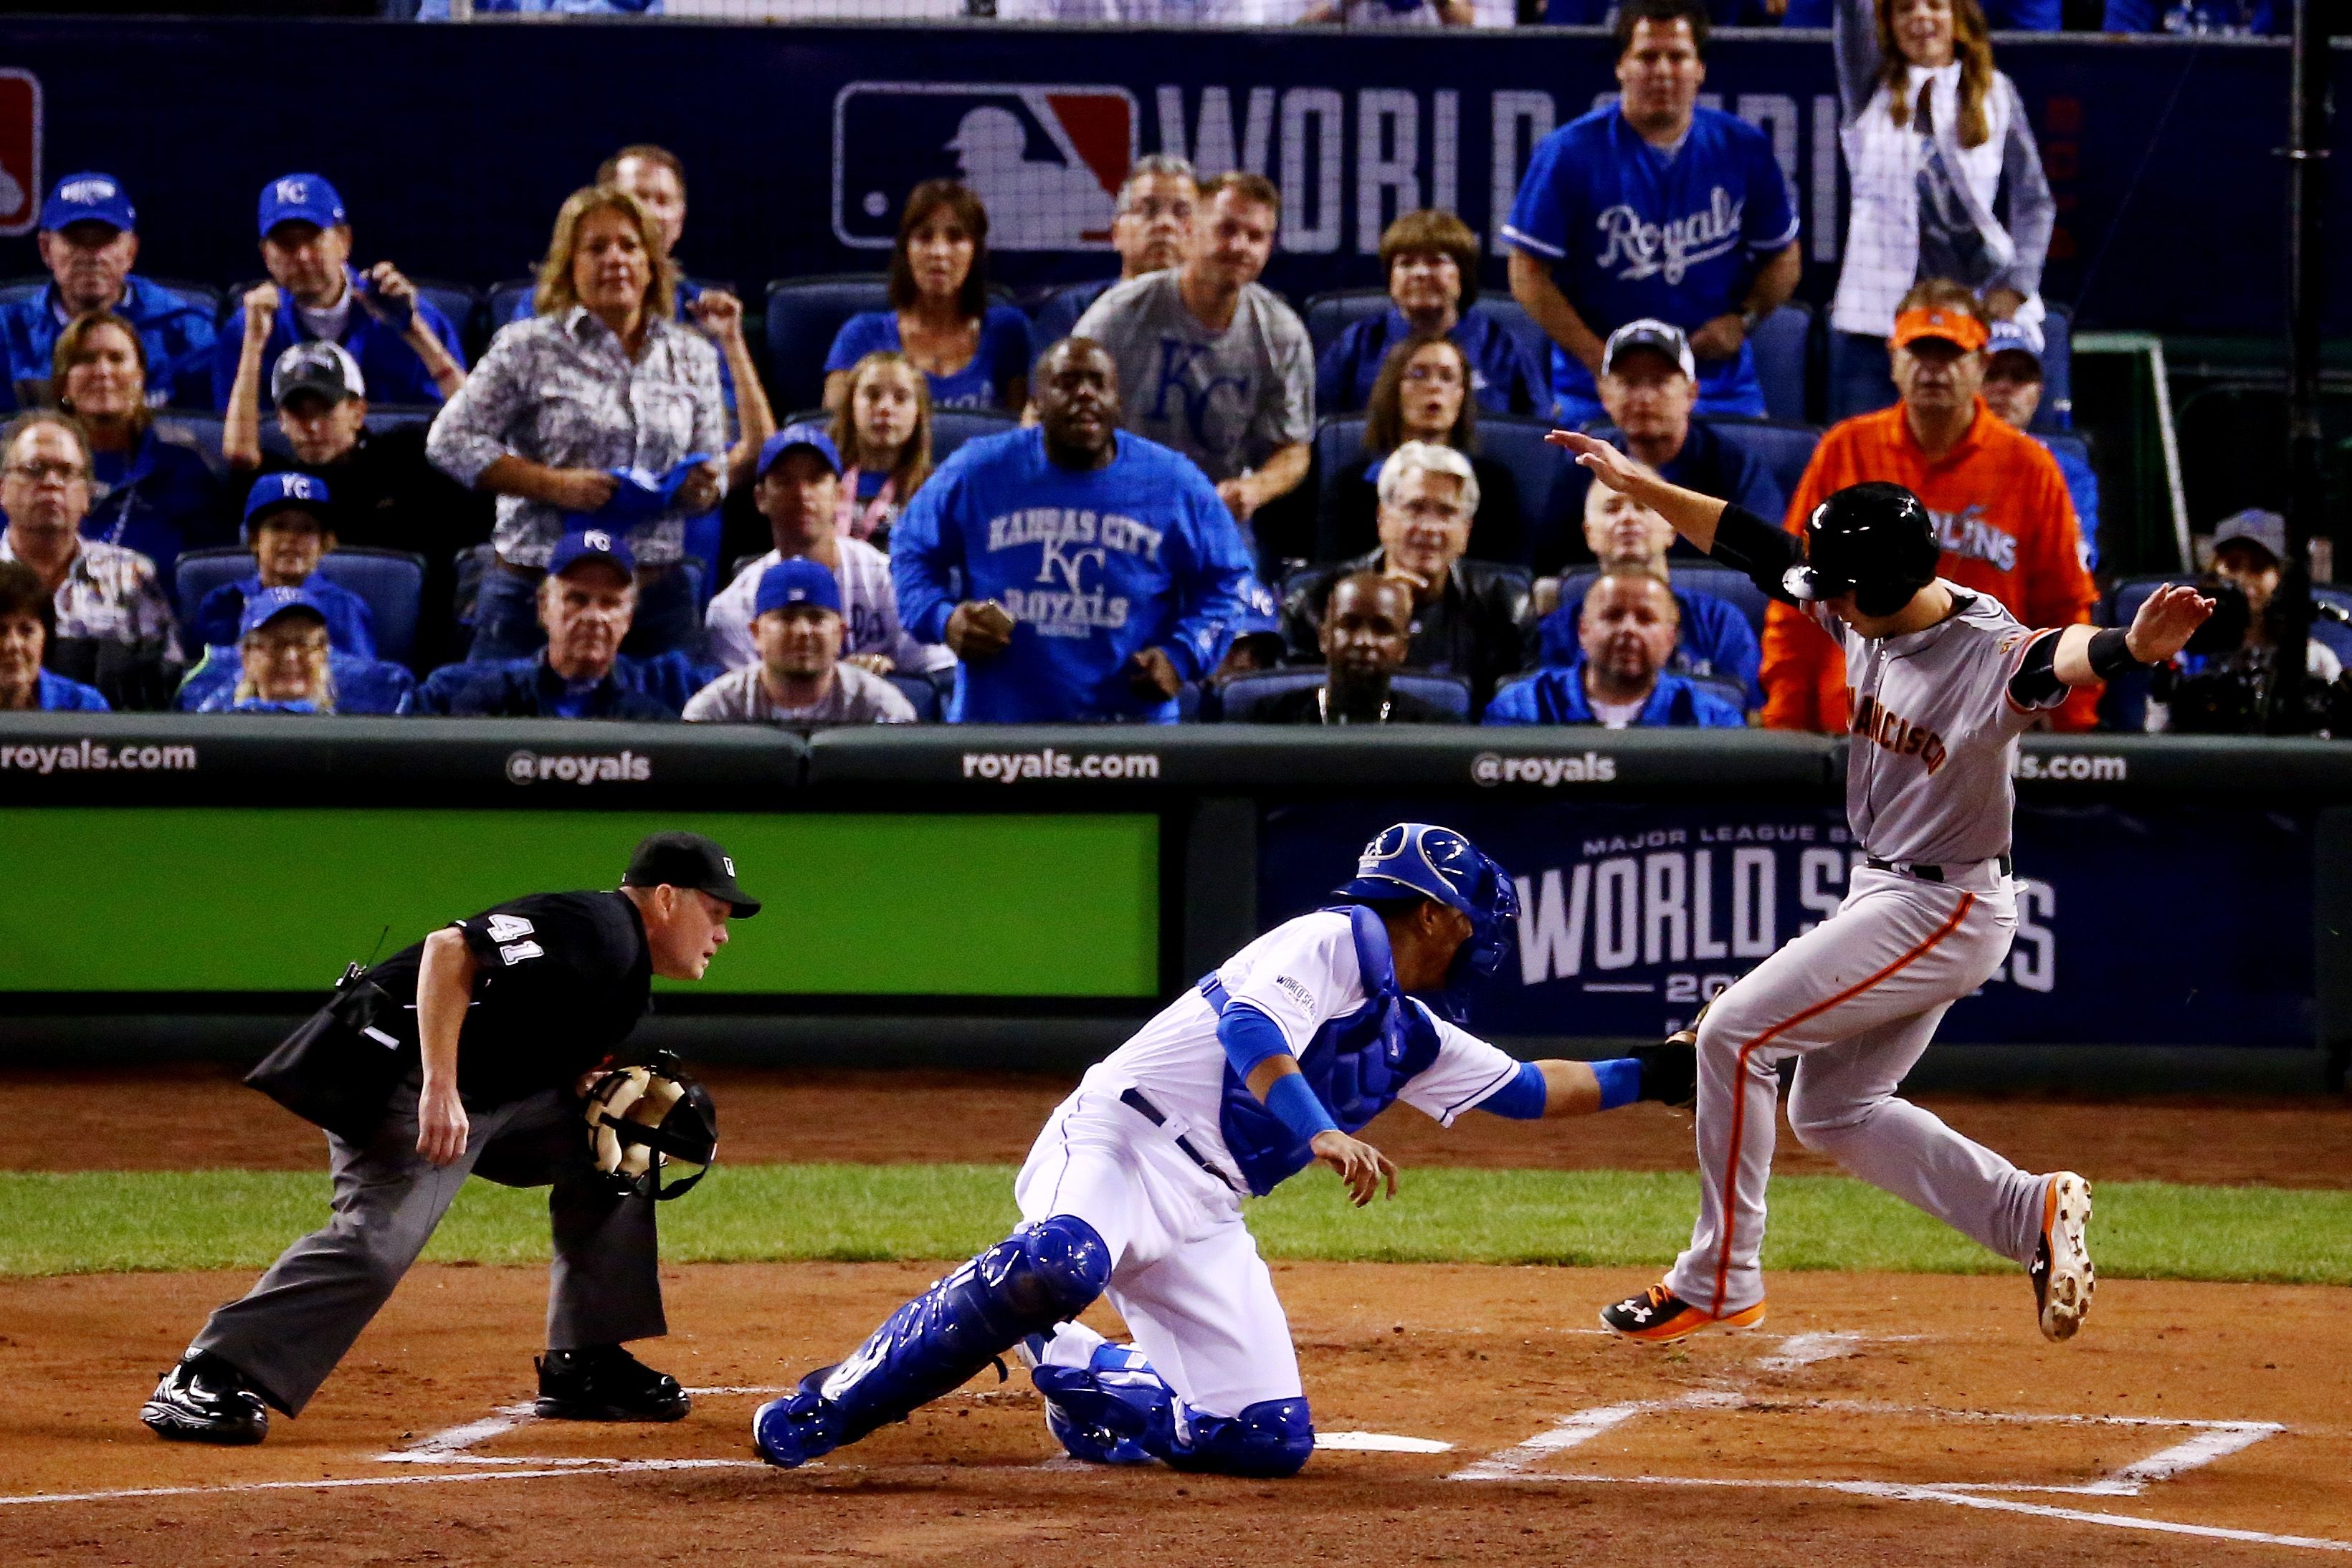 Royals offered freebies to move 'Marlins Man' from front-row during World  Series game